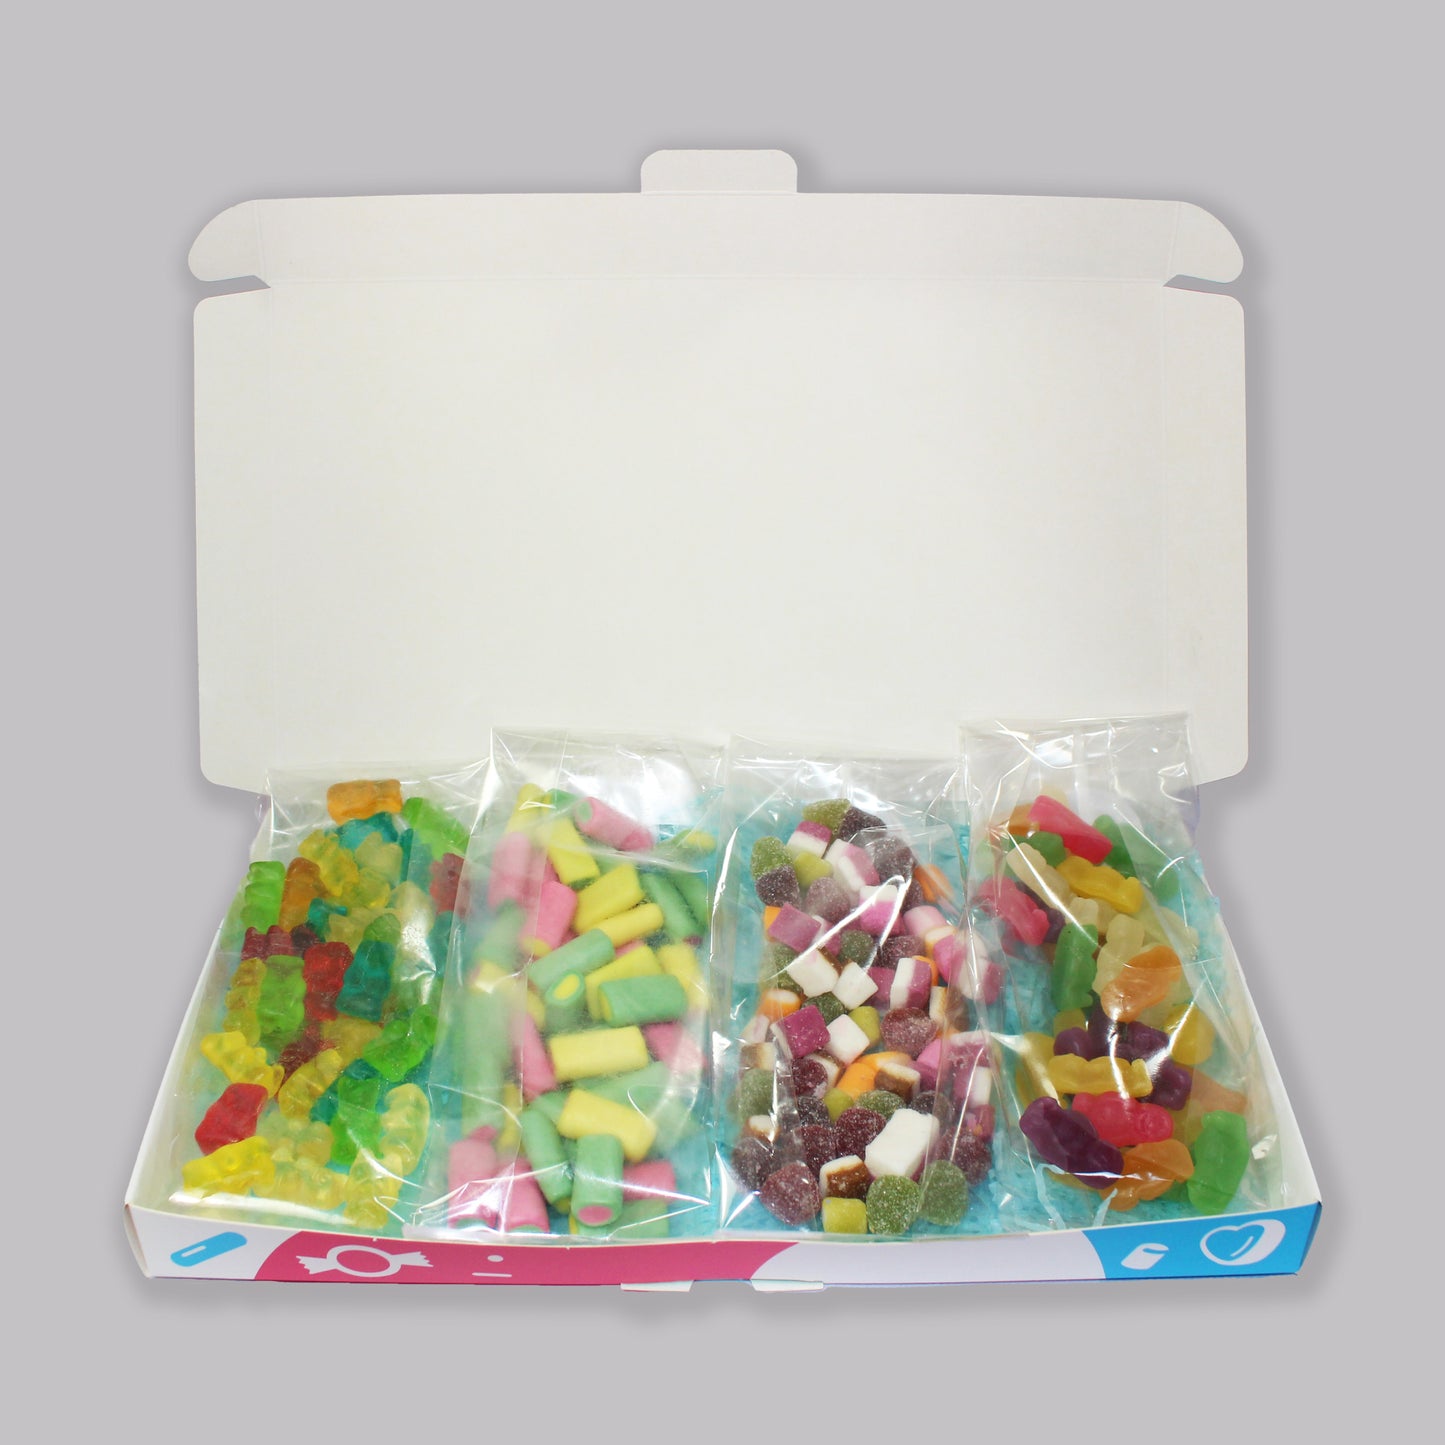 Gift Sweets - Pick and Mix Selection - 125g Mini Jelly Babies, 125g Haribo Rhubarb & Custards, 125g Dolly Mixture, 125g Jelly Teddies